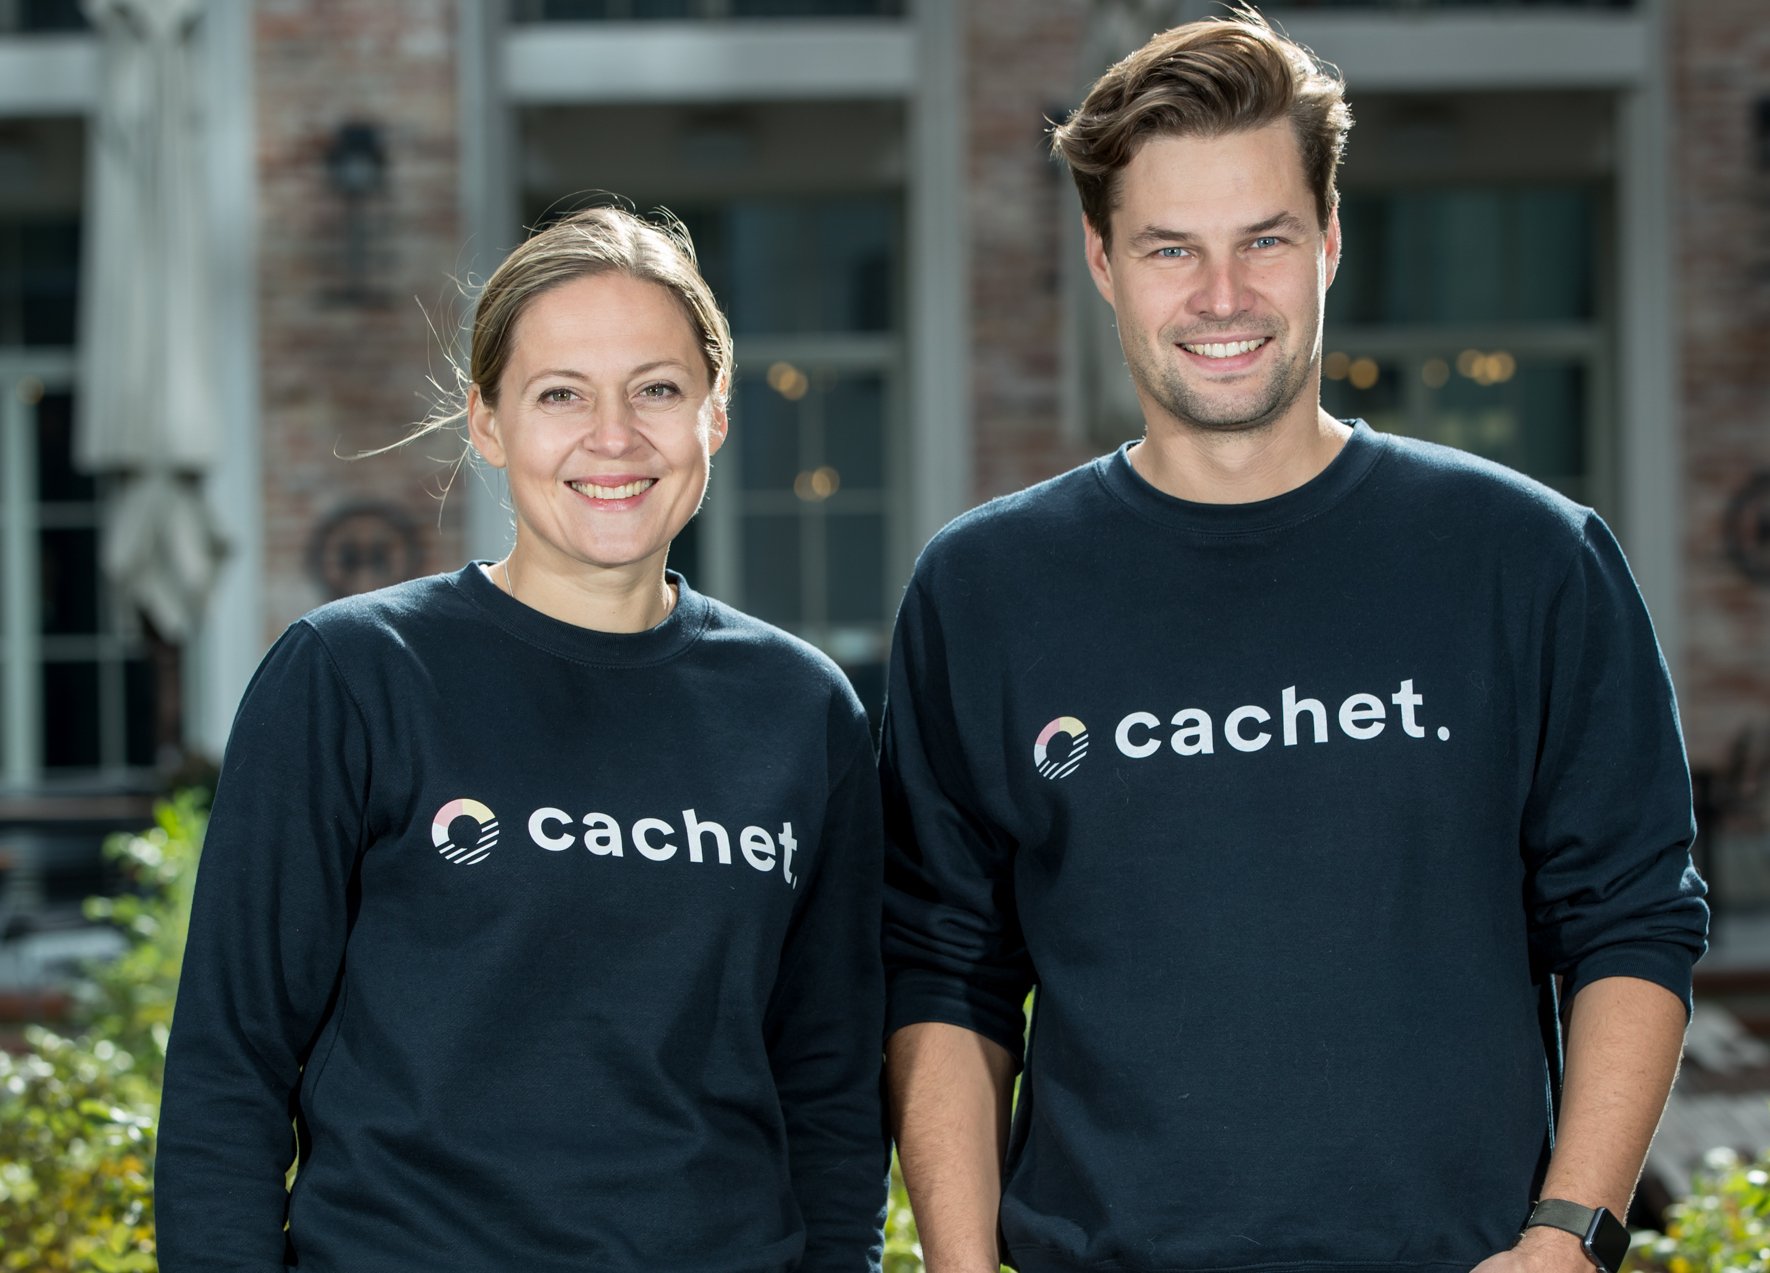 Tallinn-based Cachet collects over €1 million to cut insurance rates for gig workers and expand in Europe